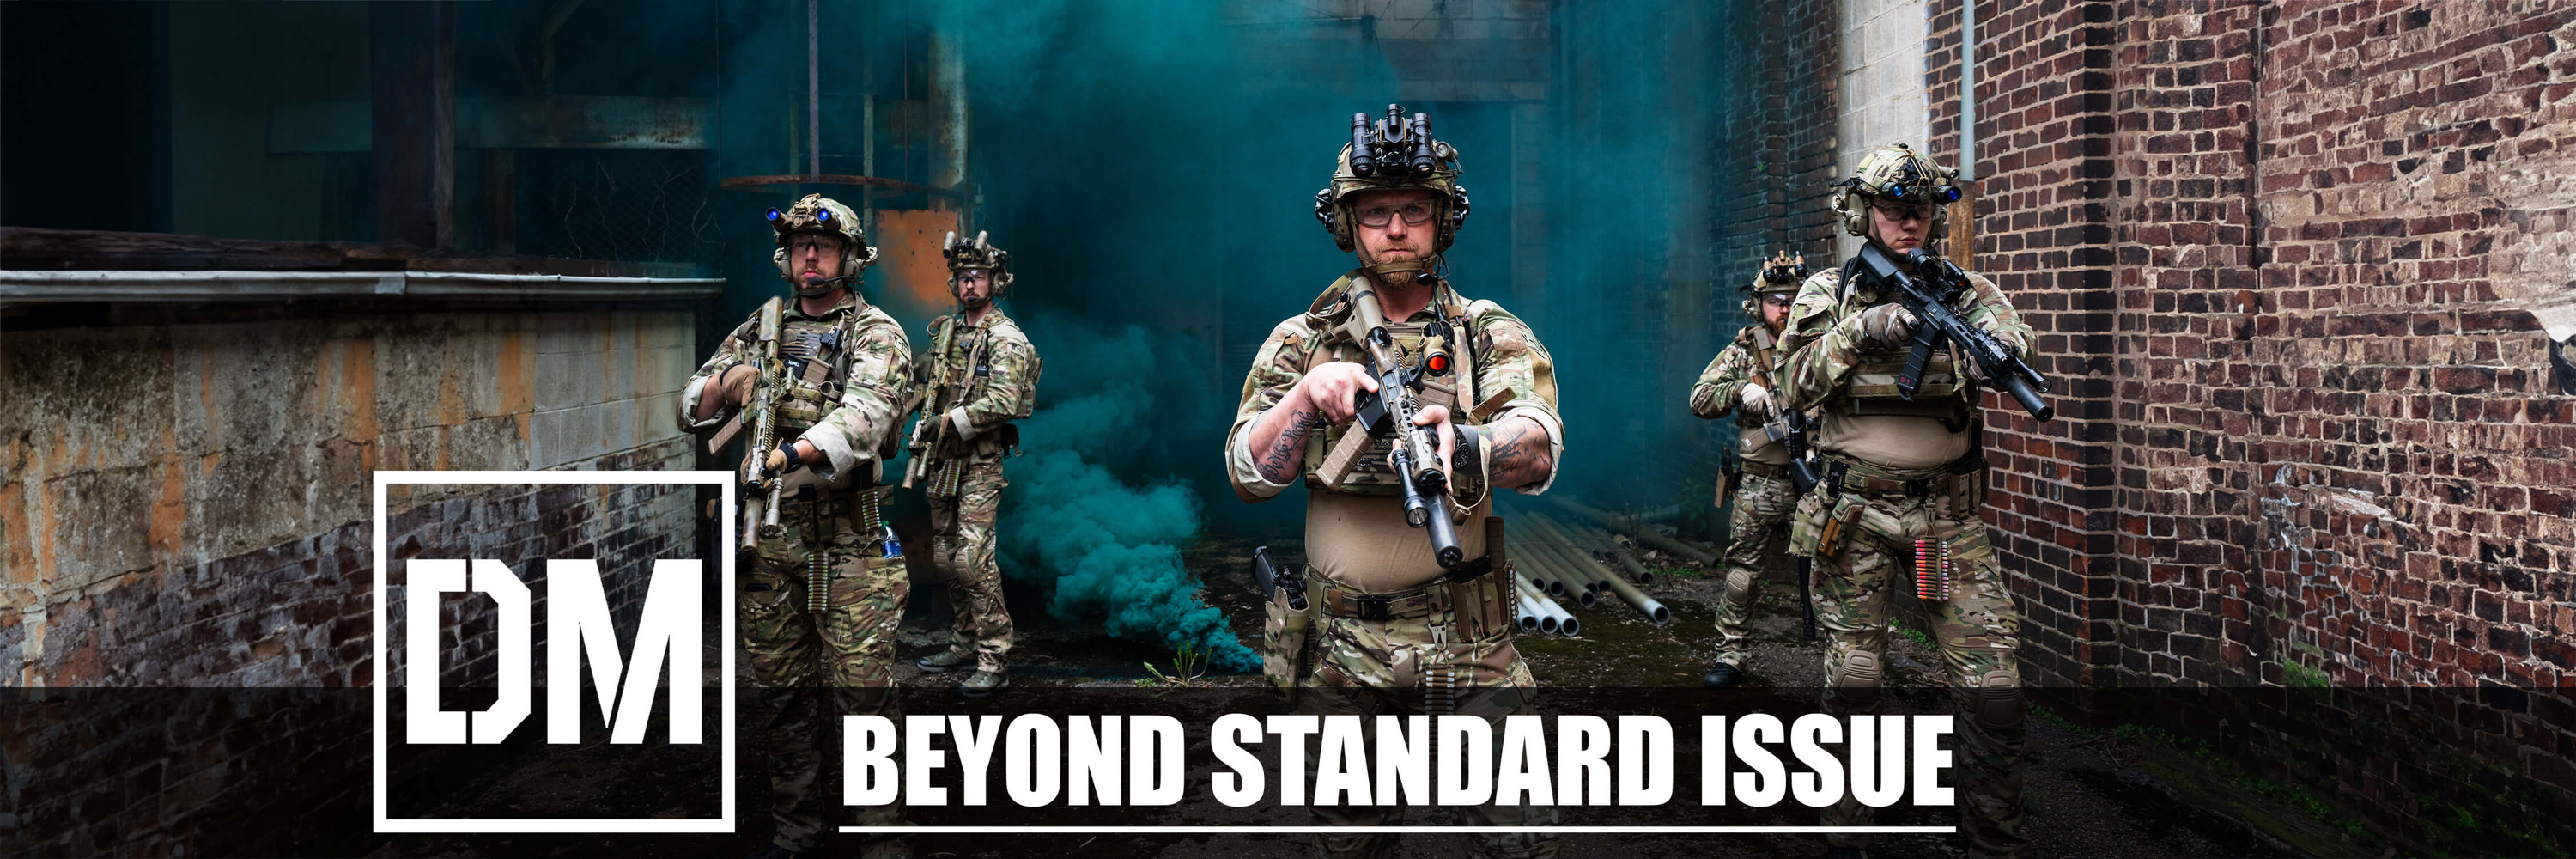 5 soldiers wearing tactical gear in an abandoned warehouse with the words 